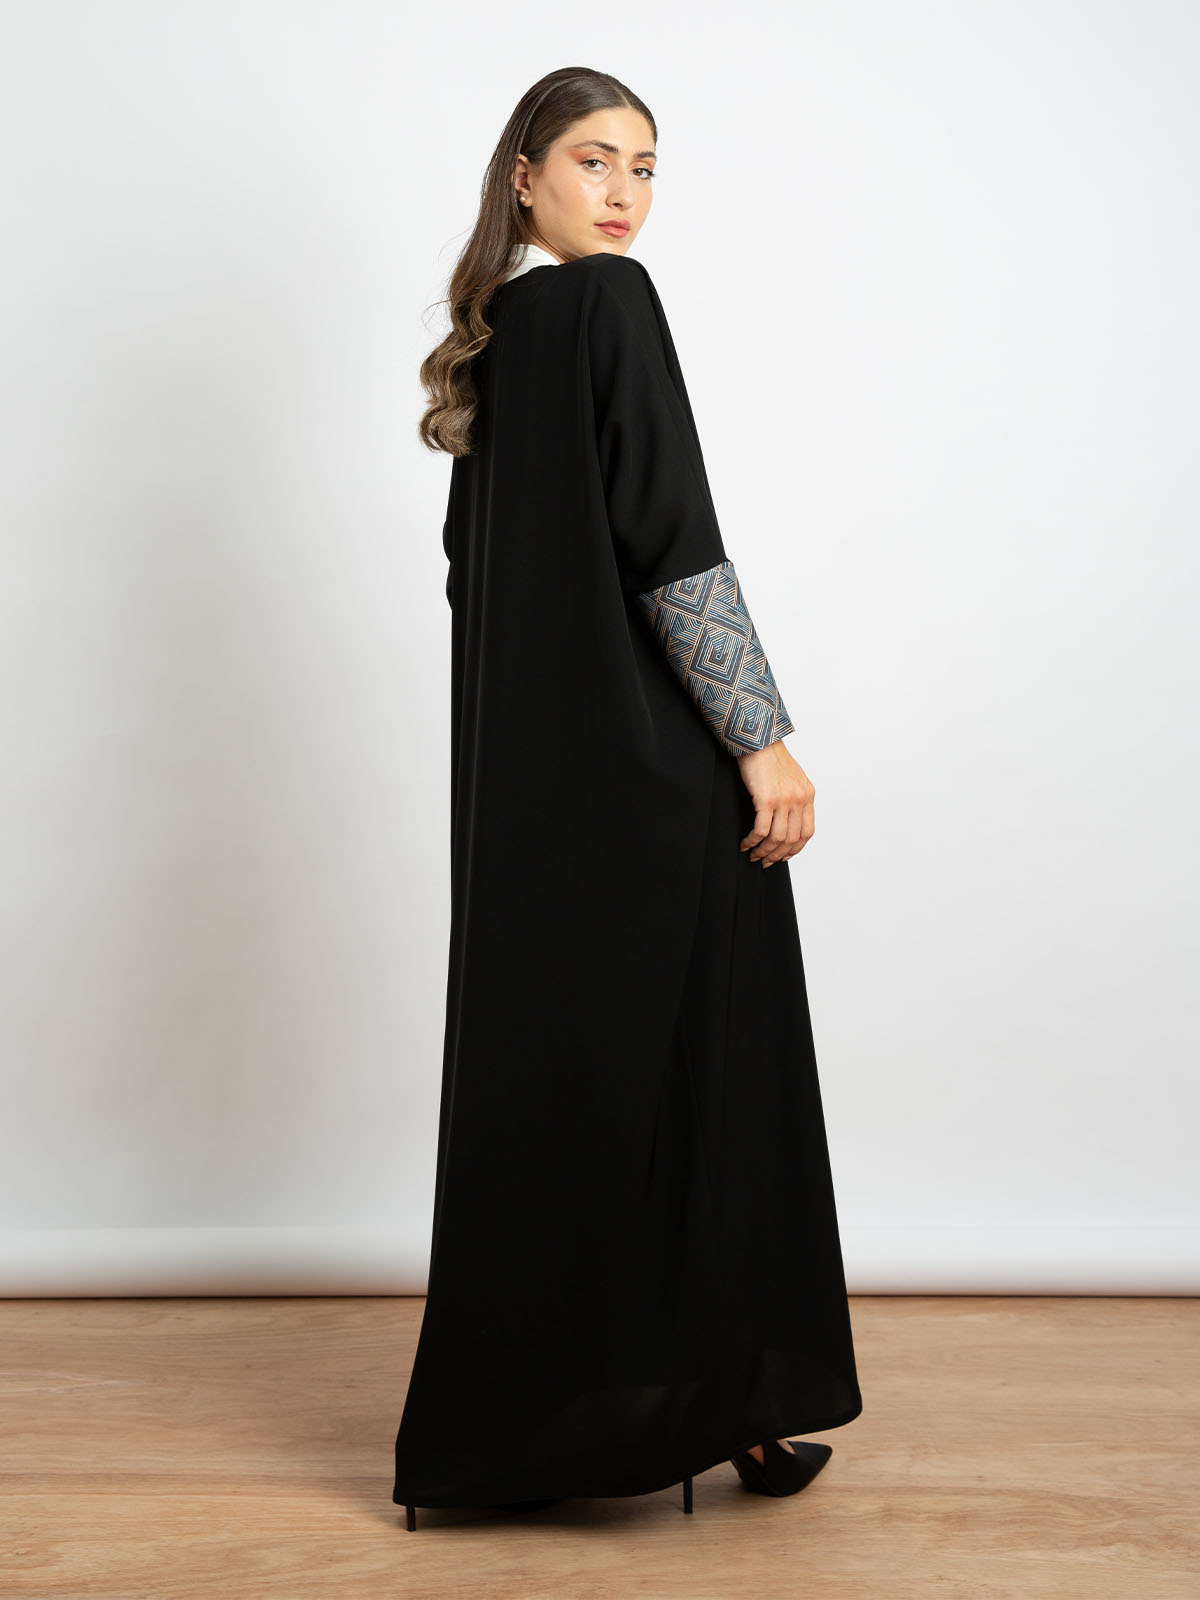 Black with Blue - Half Bisht Long Open Abaya with Geometric Art Piece on the Sleeves